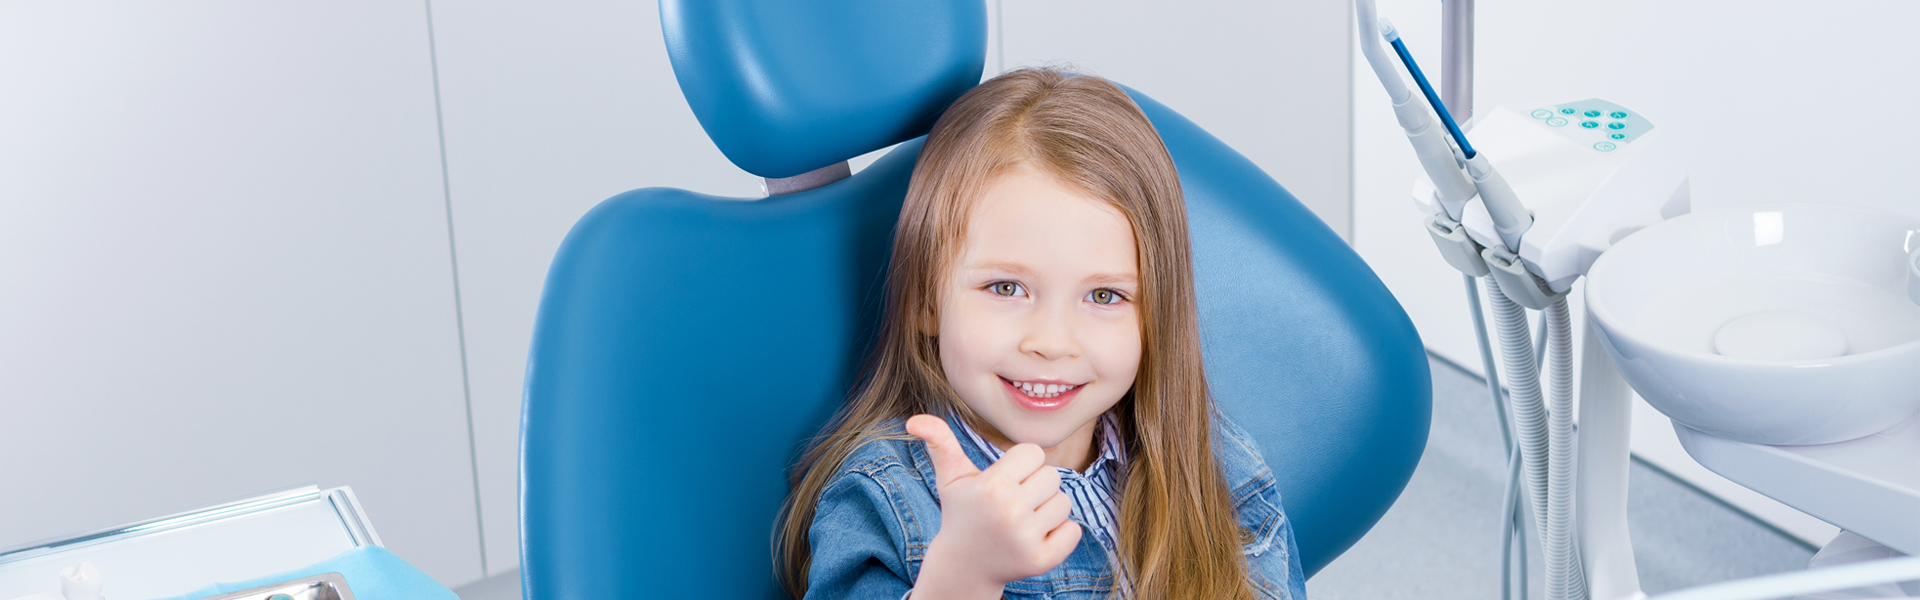 How Dental Sealants Protect Your Molars by Preventing Cavities?